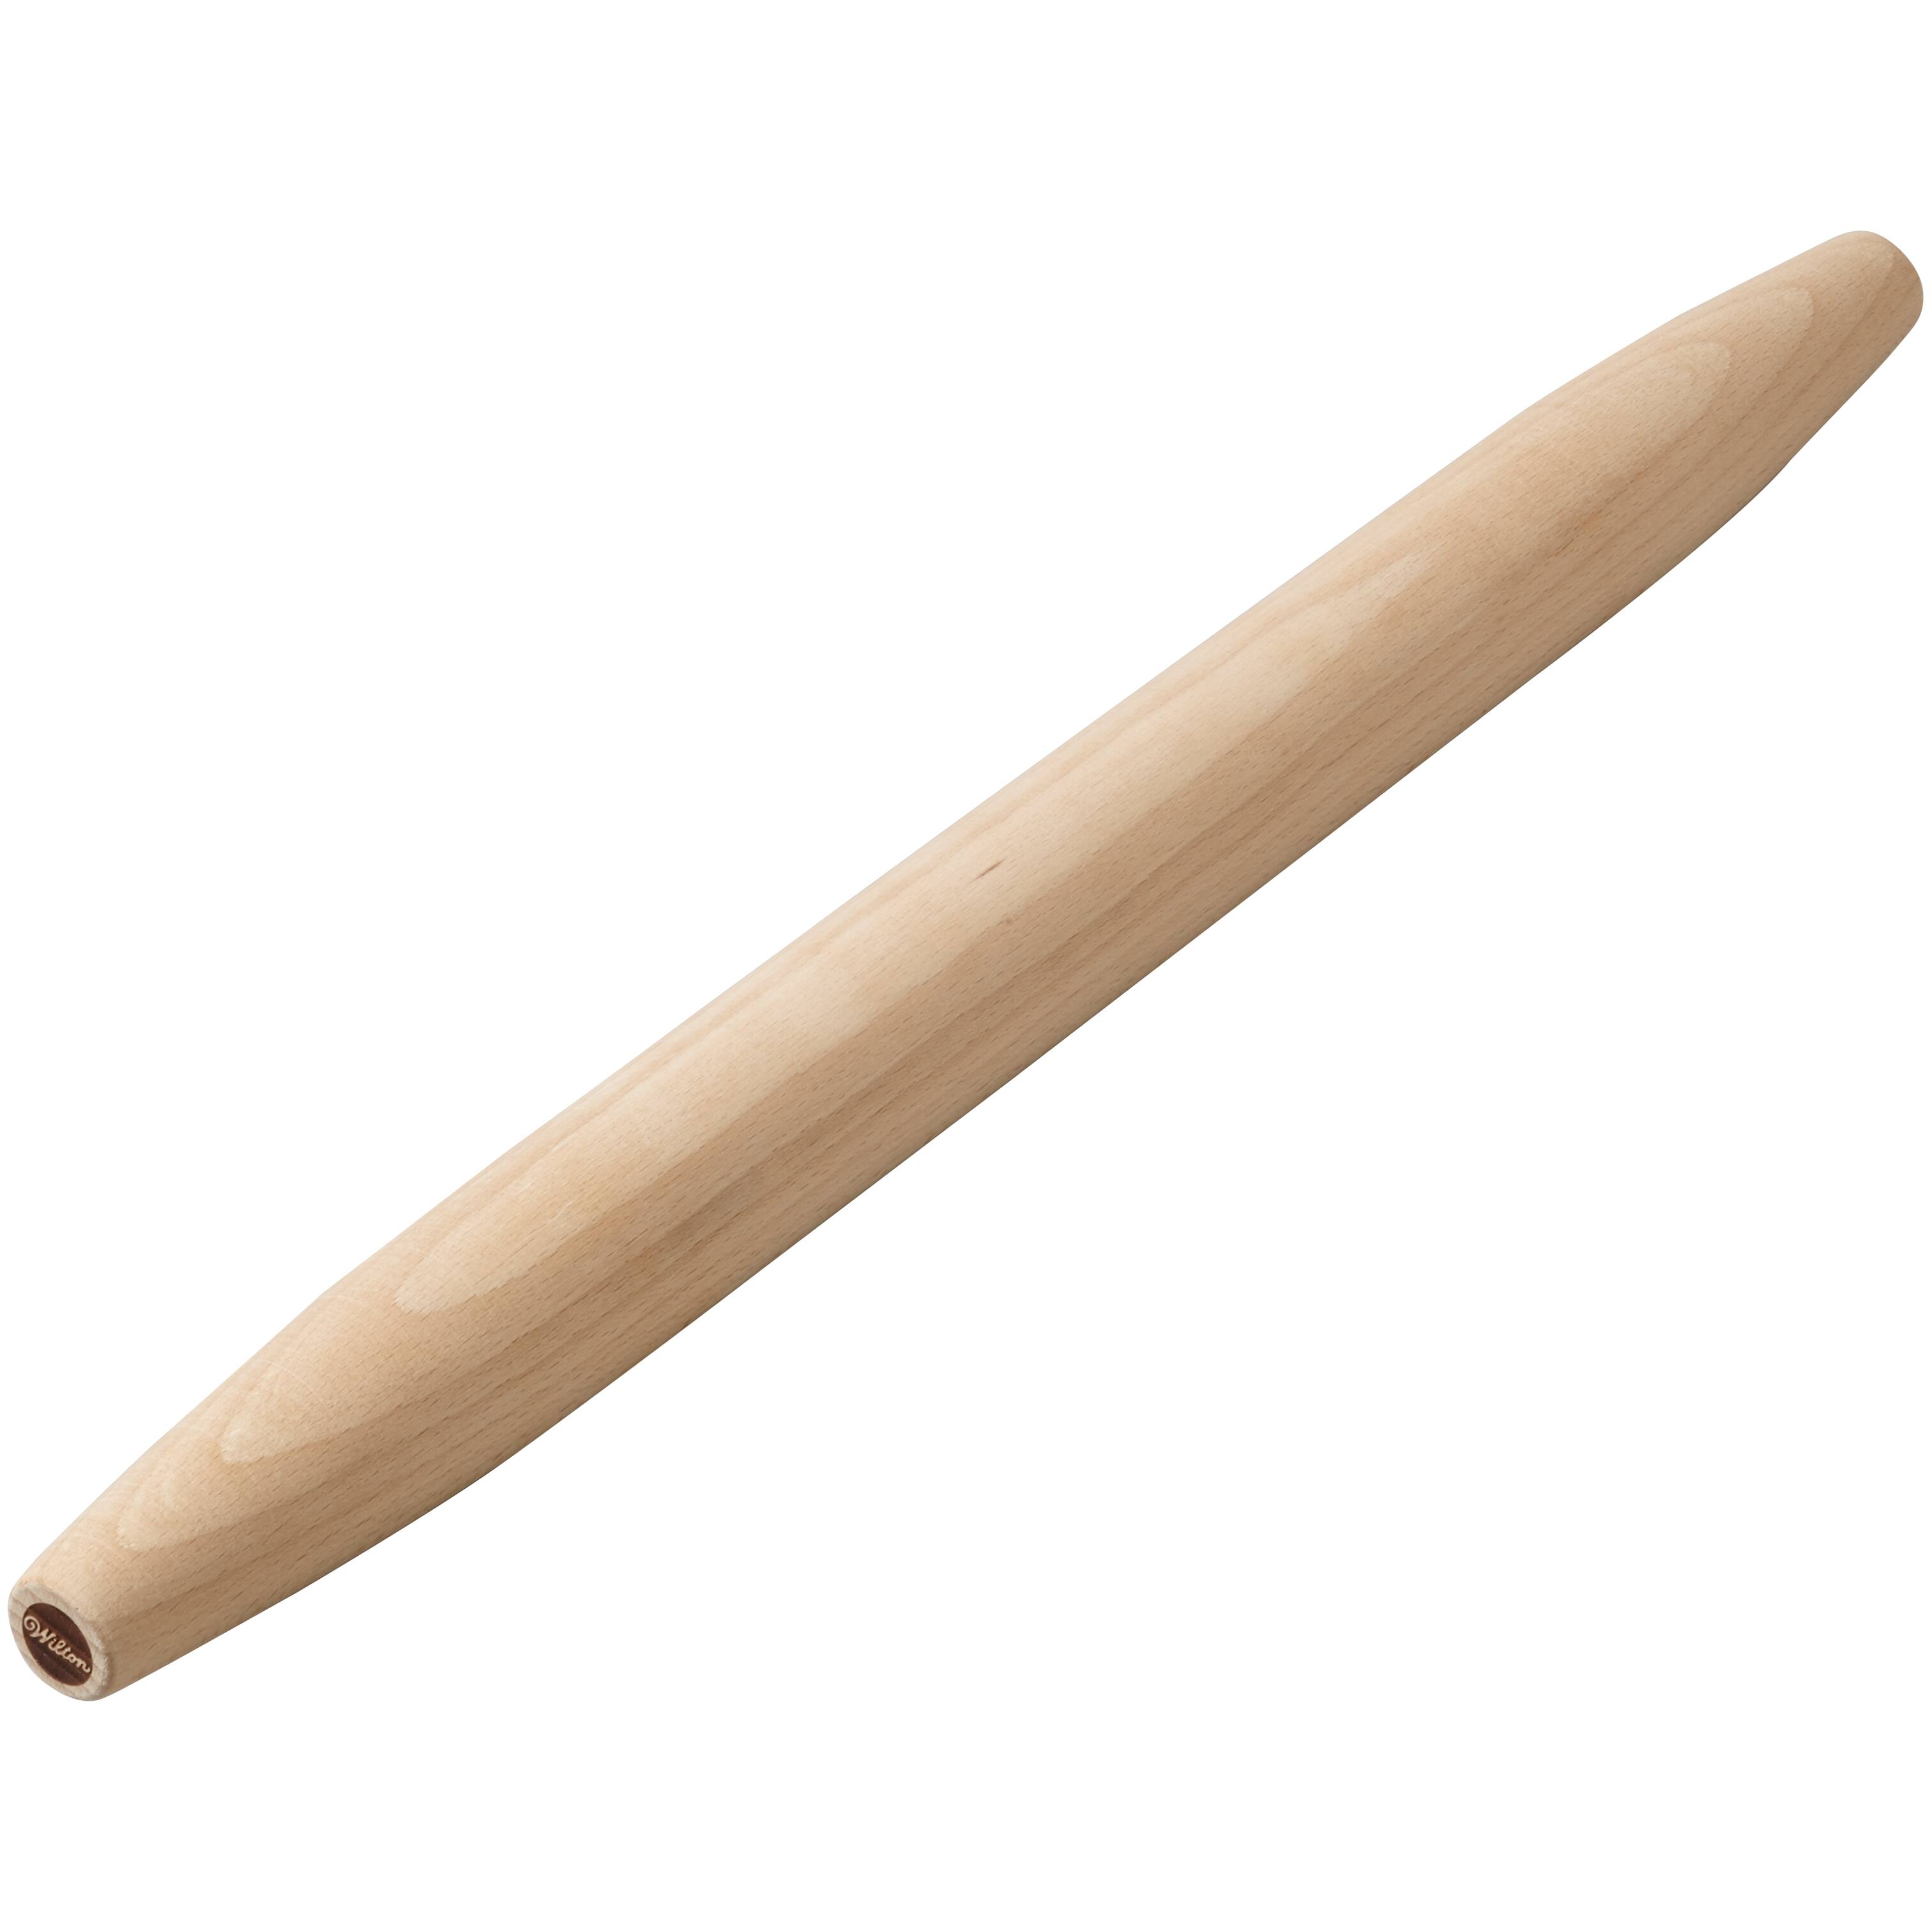 Wilton French Rolling Pin